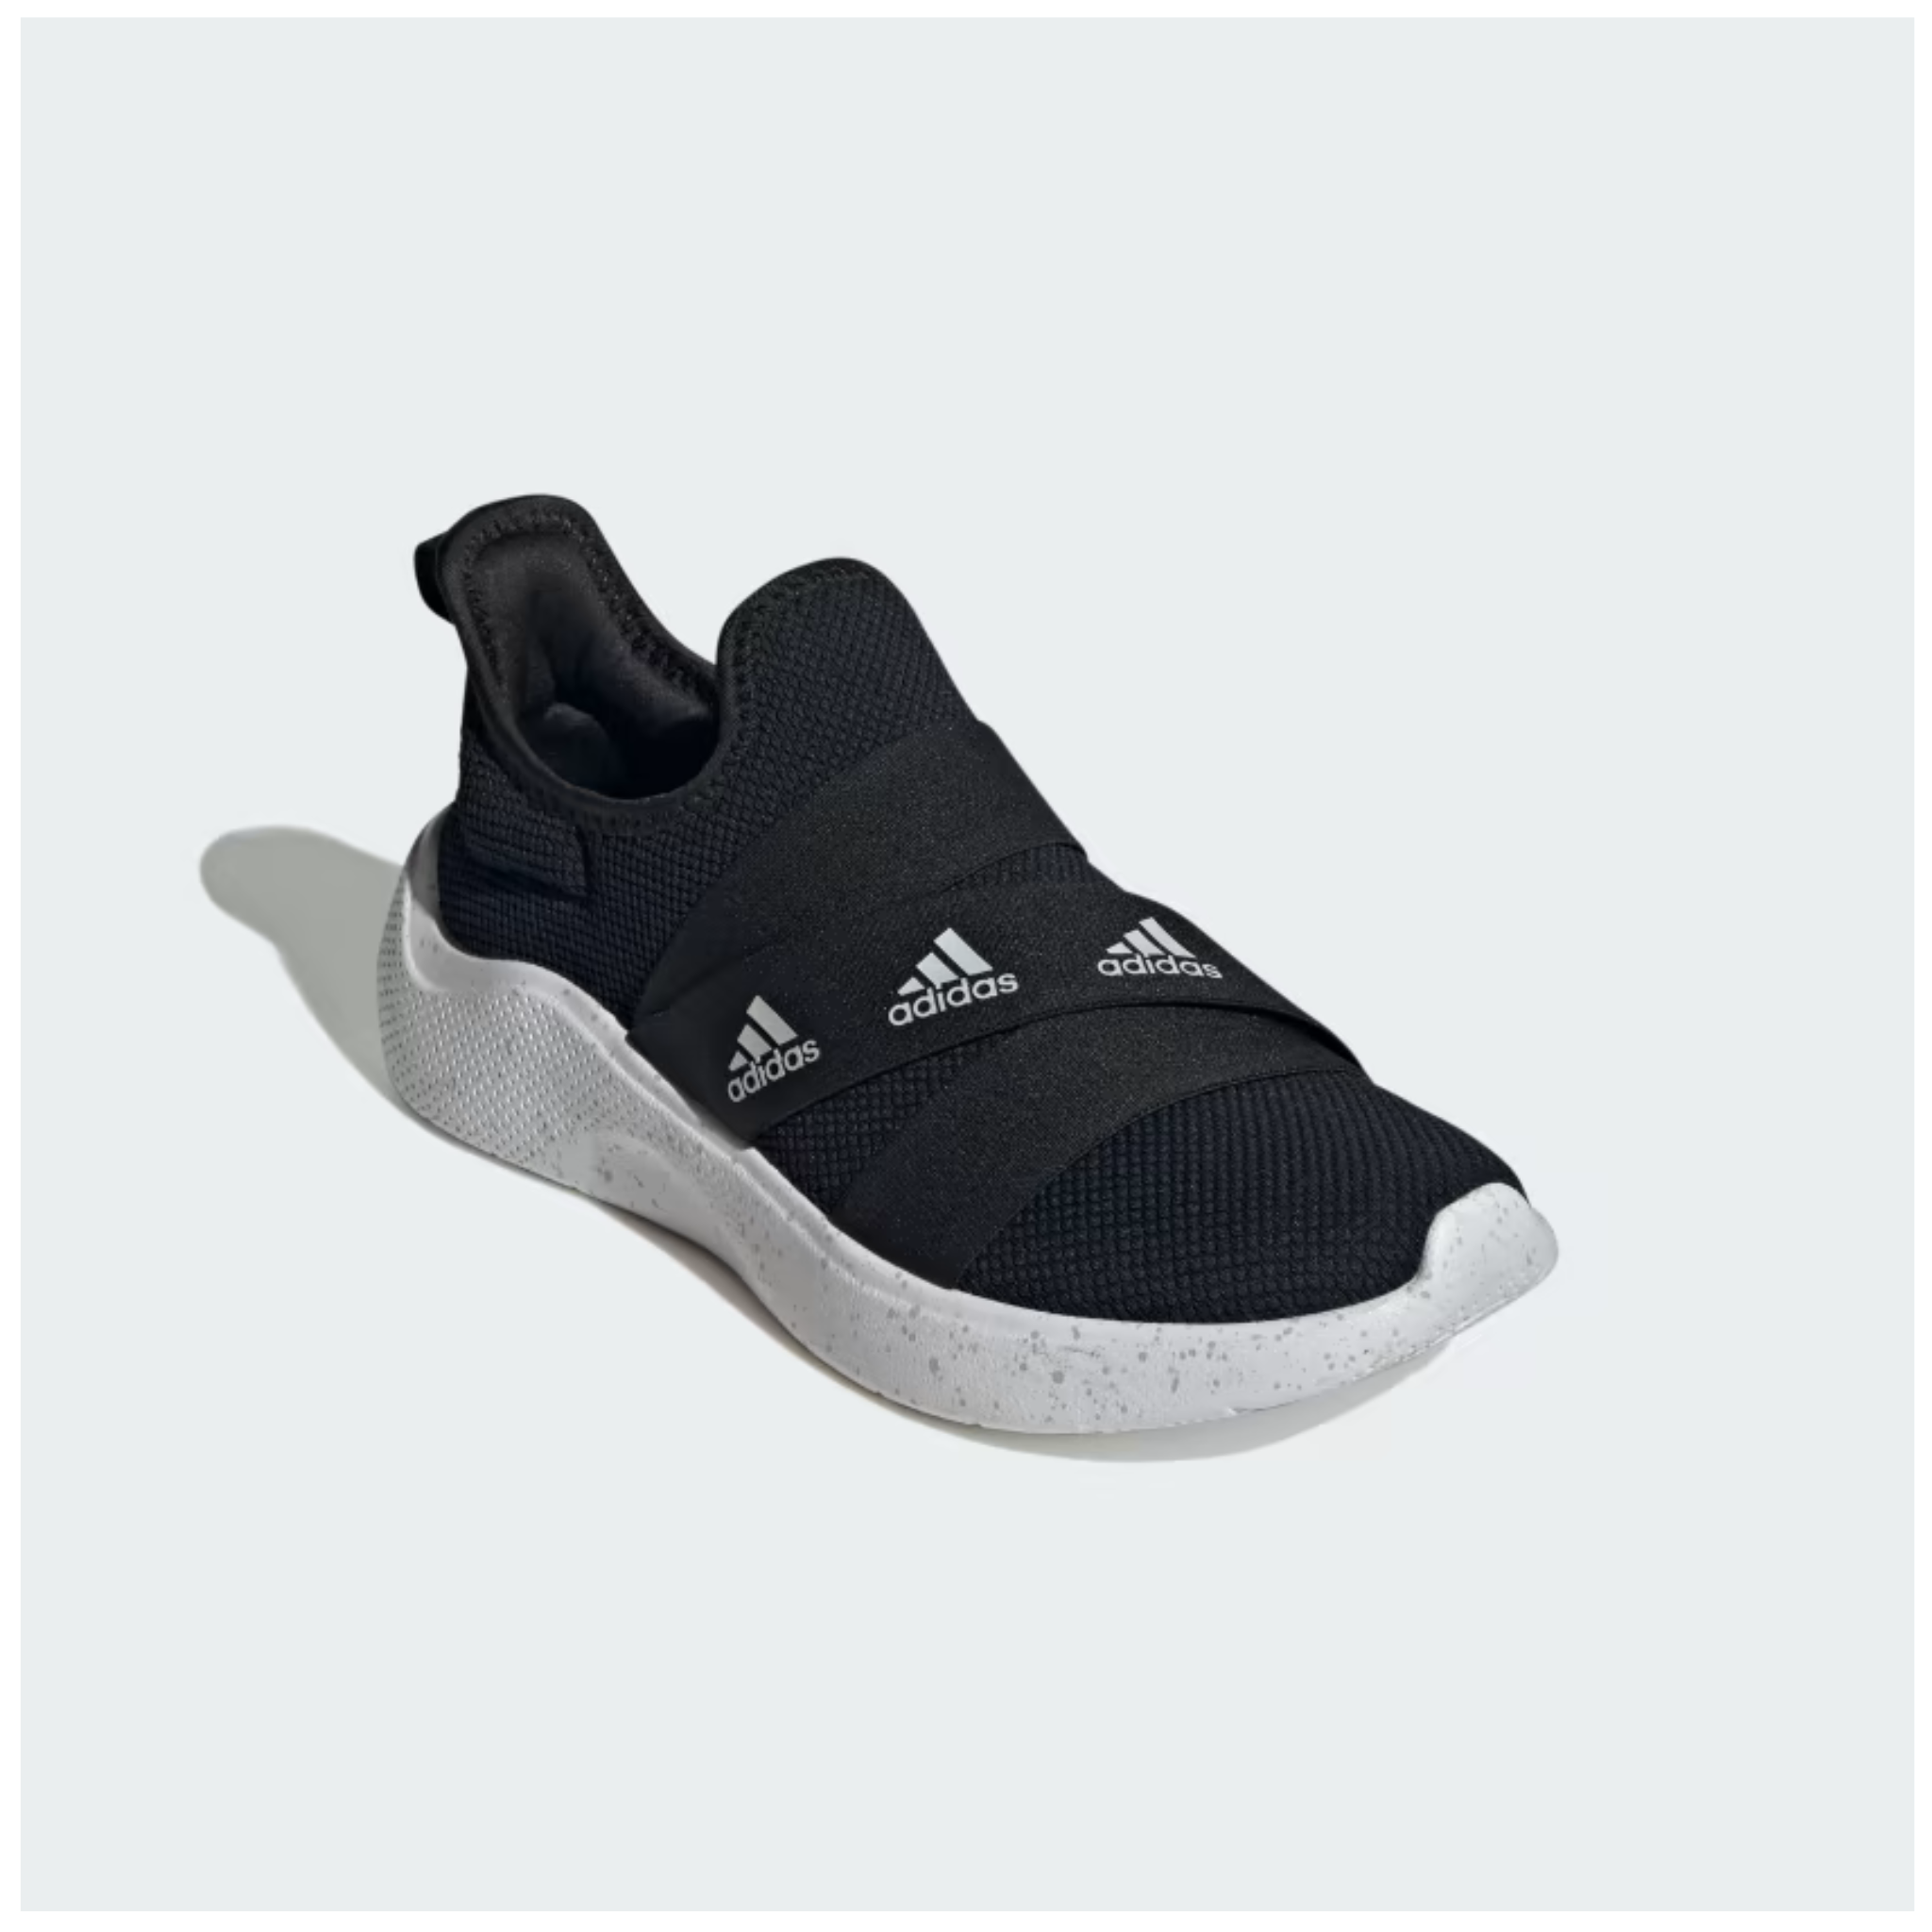 Huge Adidas Sale On Shoes, Clothing And Accessories